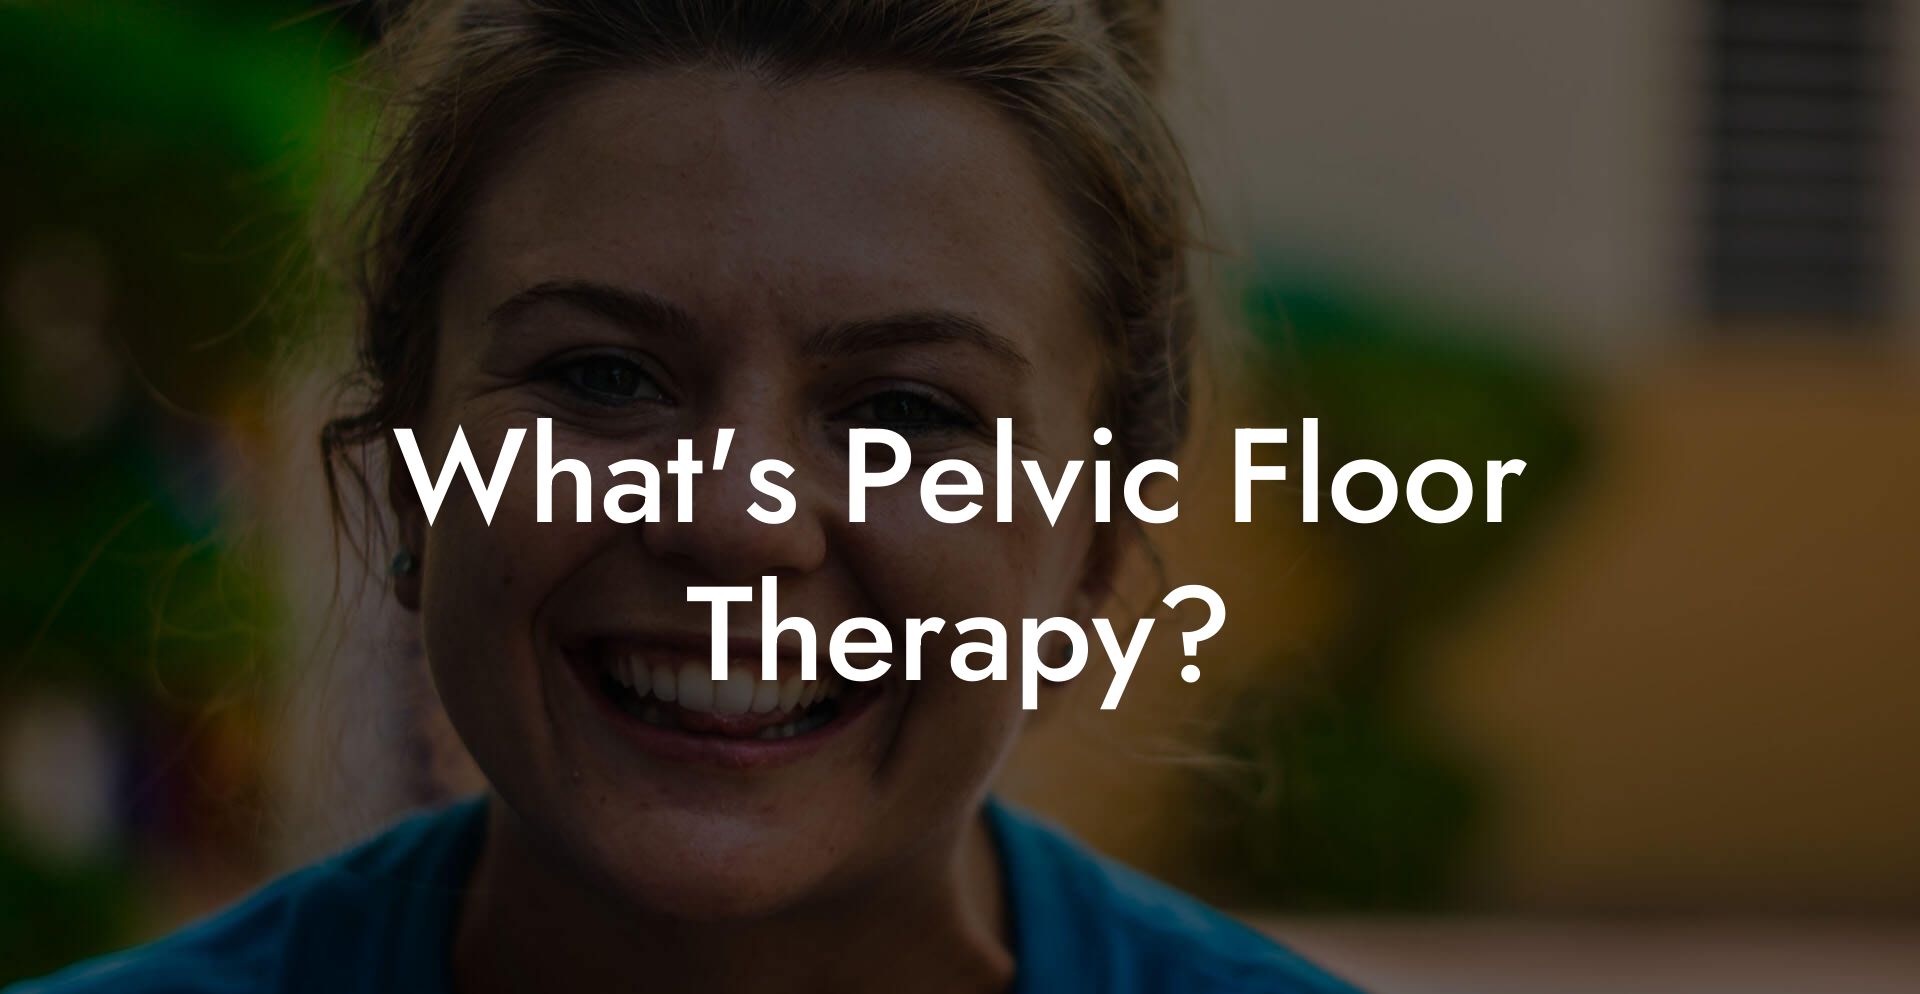 What's Pelvic Floor Therapy?